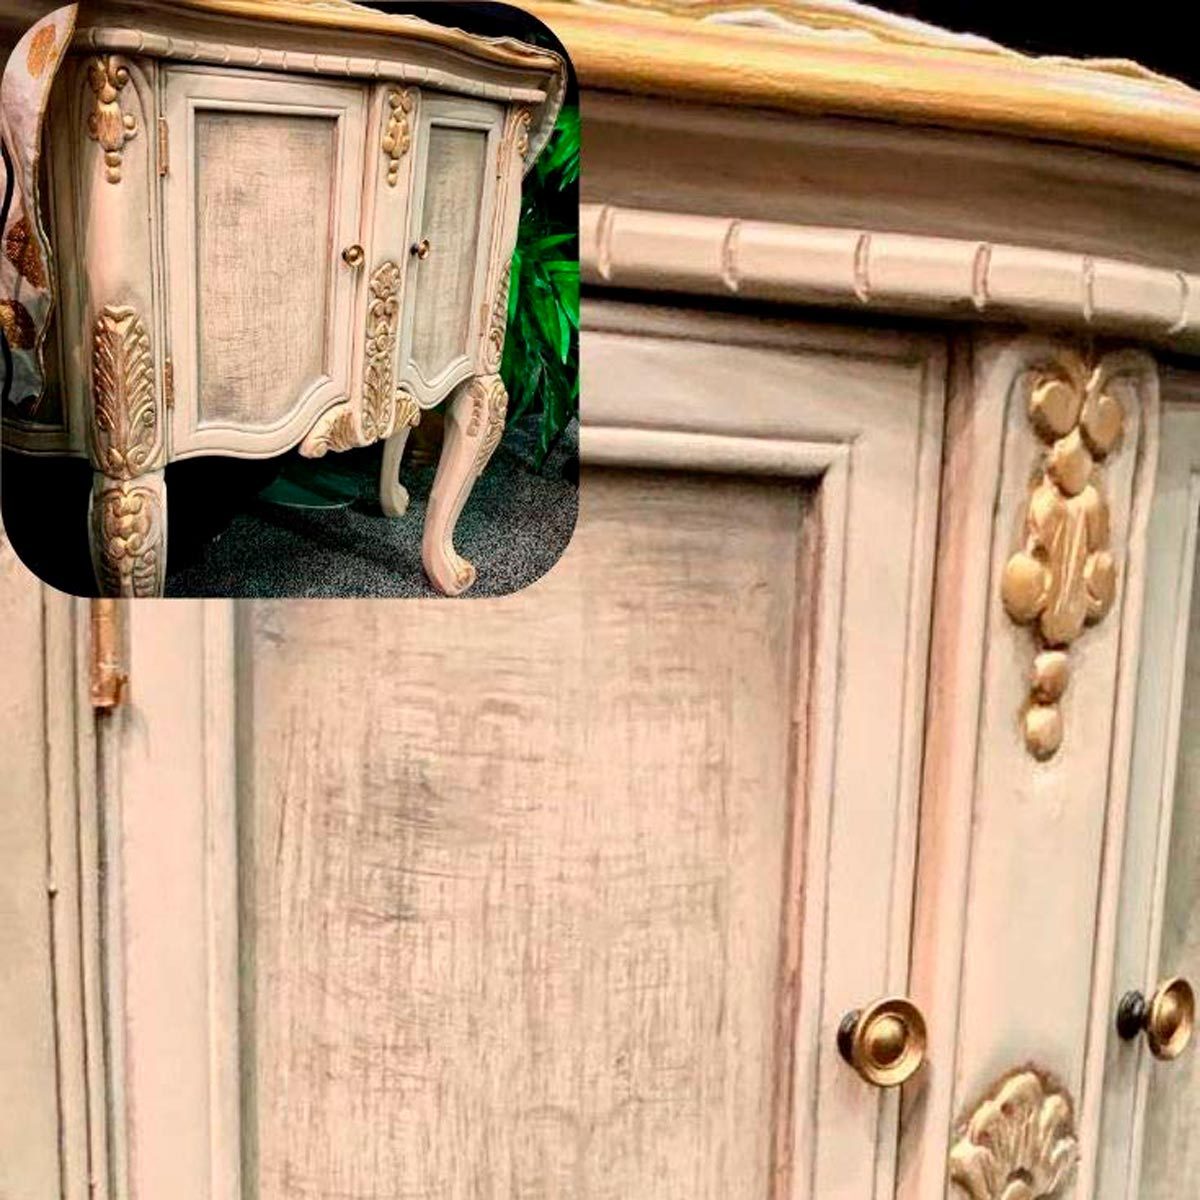 Antique Painted Cabinets Tips And Techniques To Try At Home